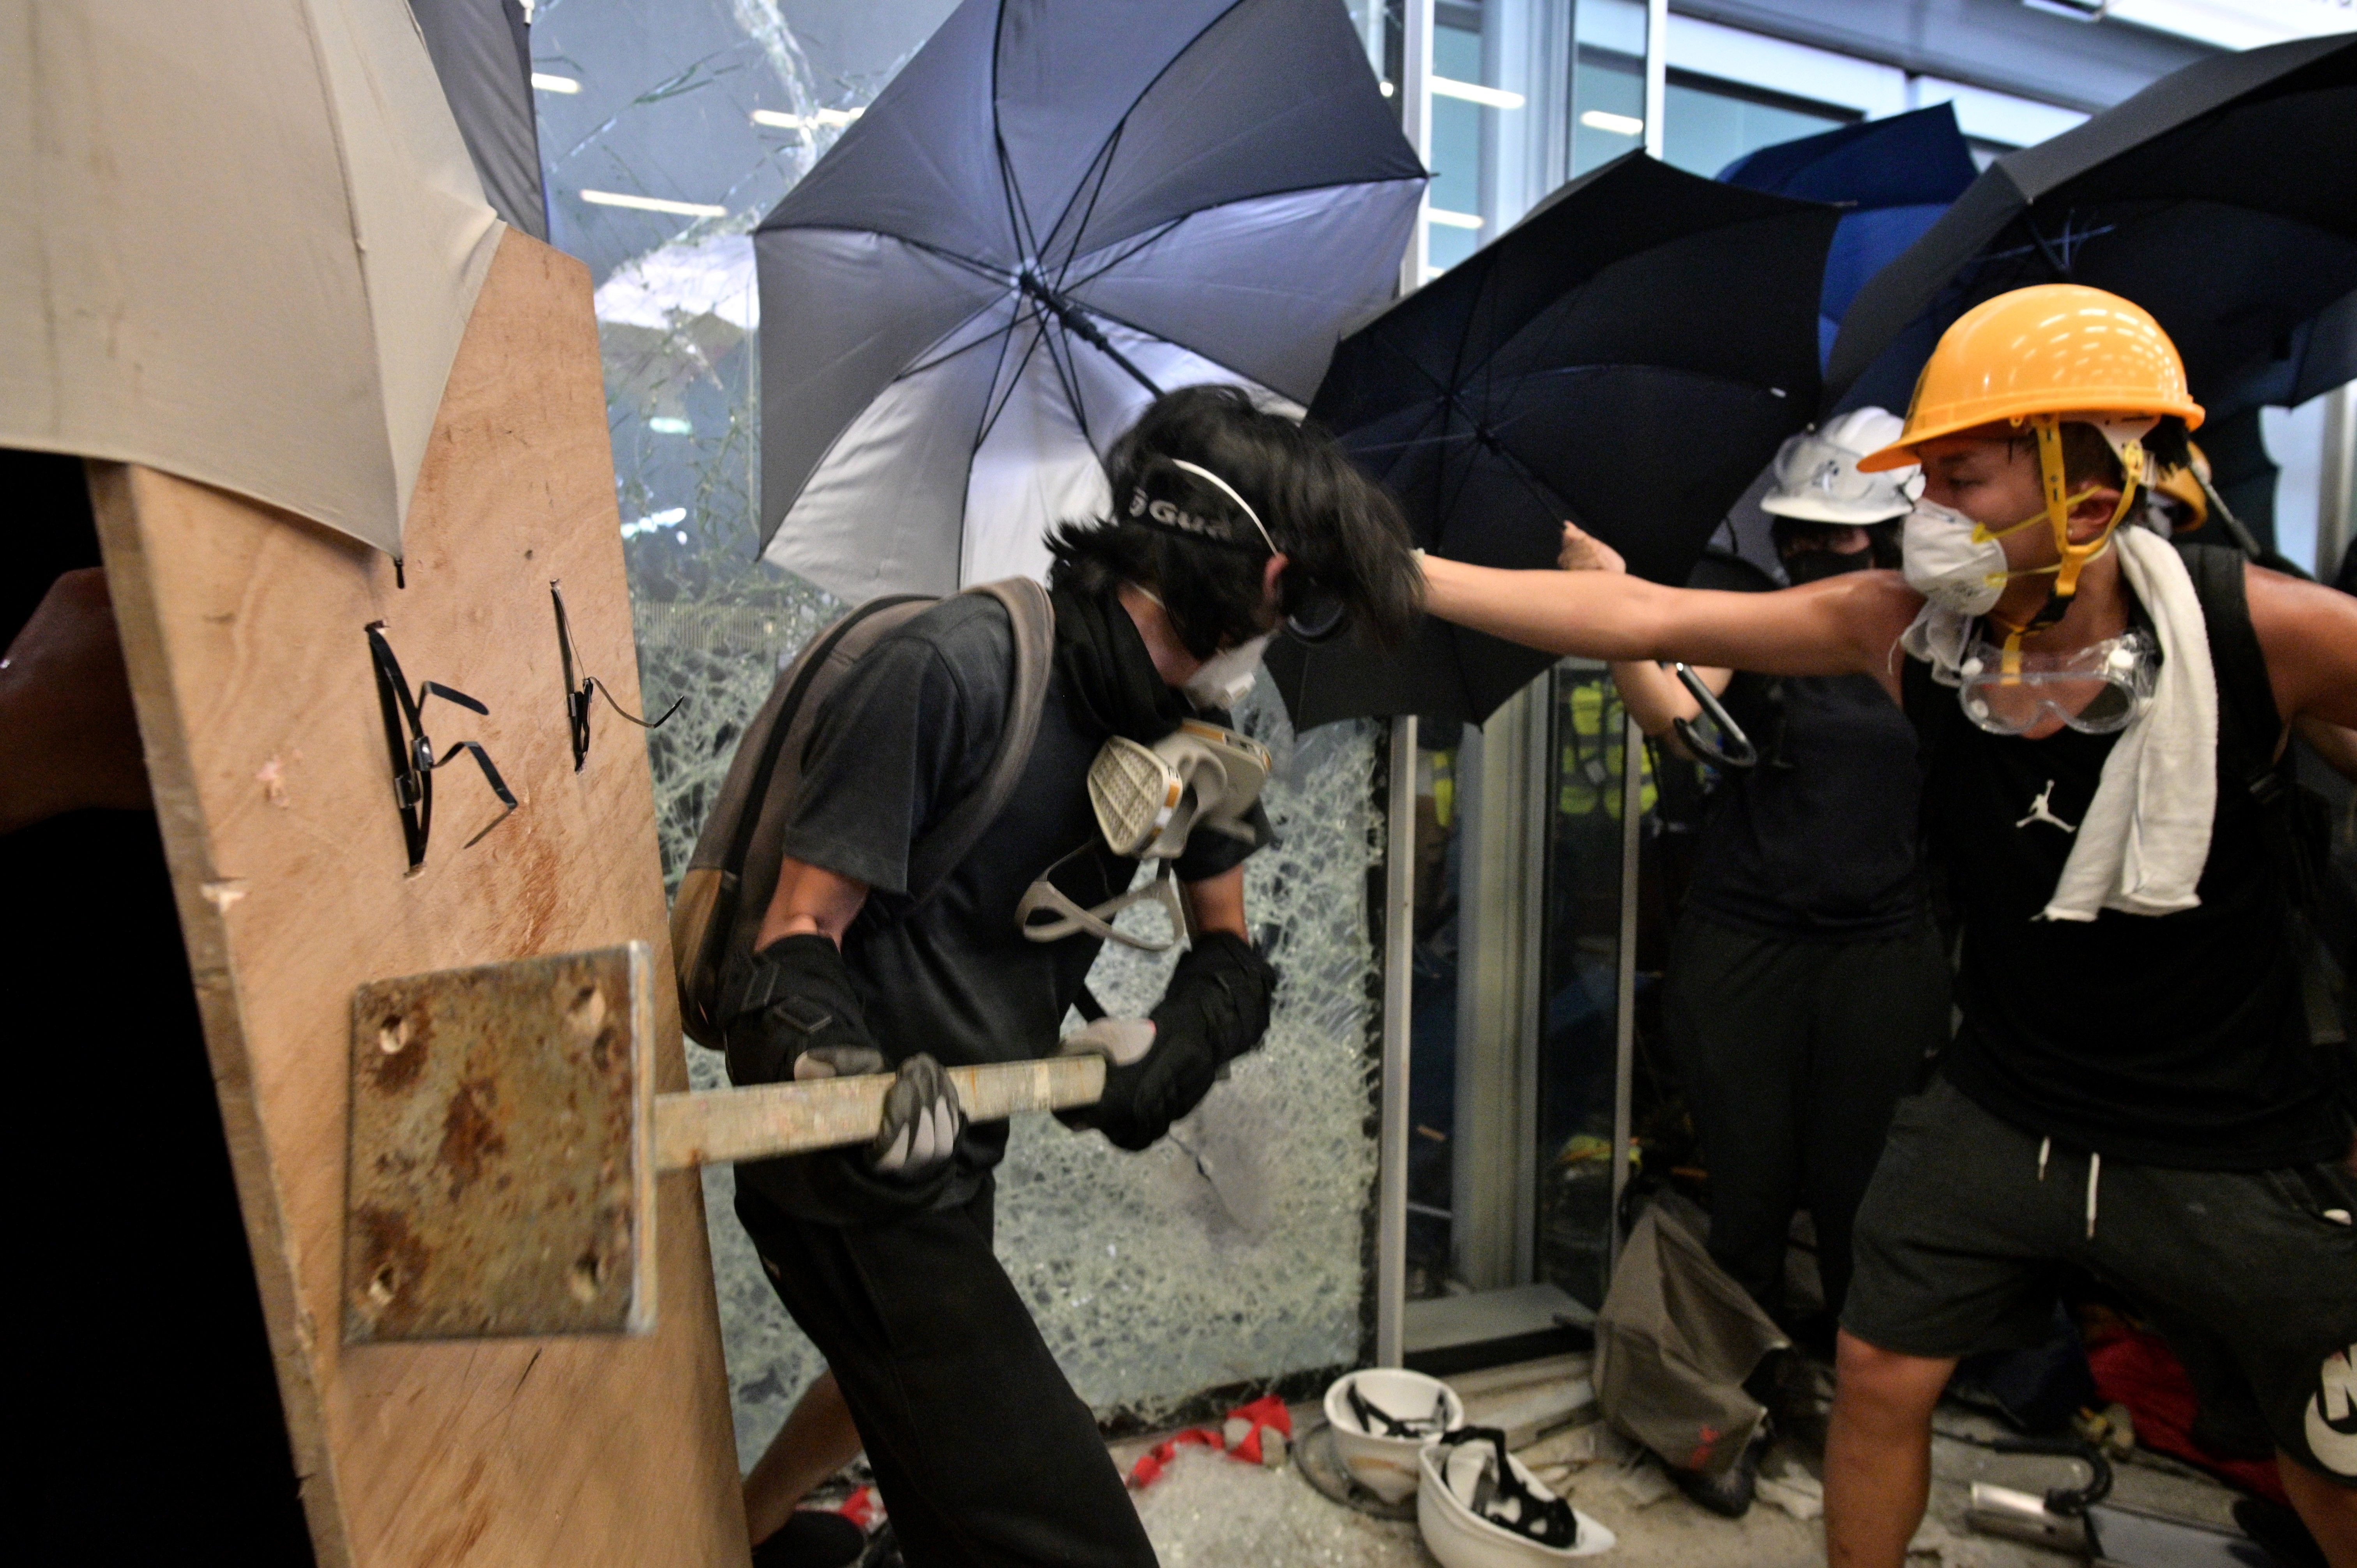 Protesters attempt to smash a glass door at the government headquarters in Hong Kong on July 1.